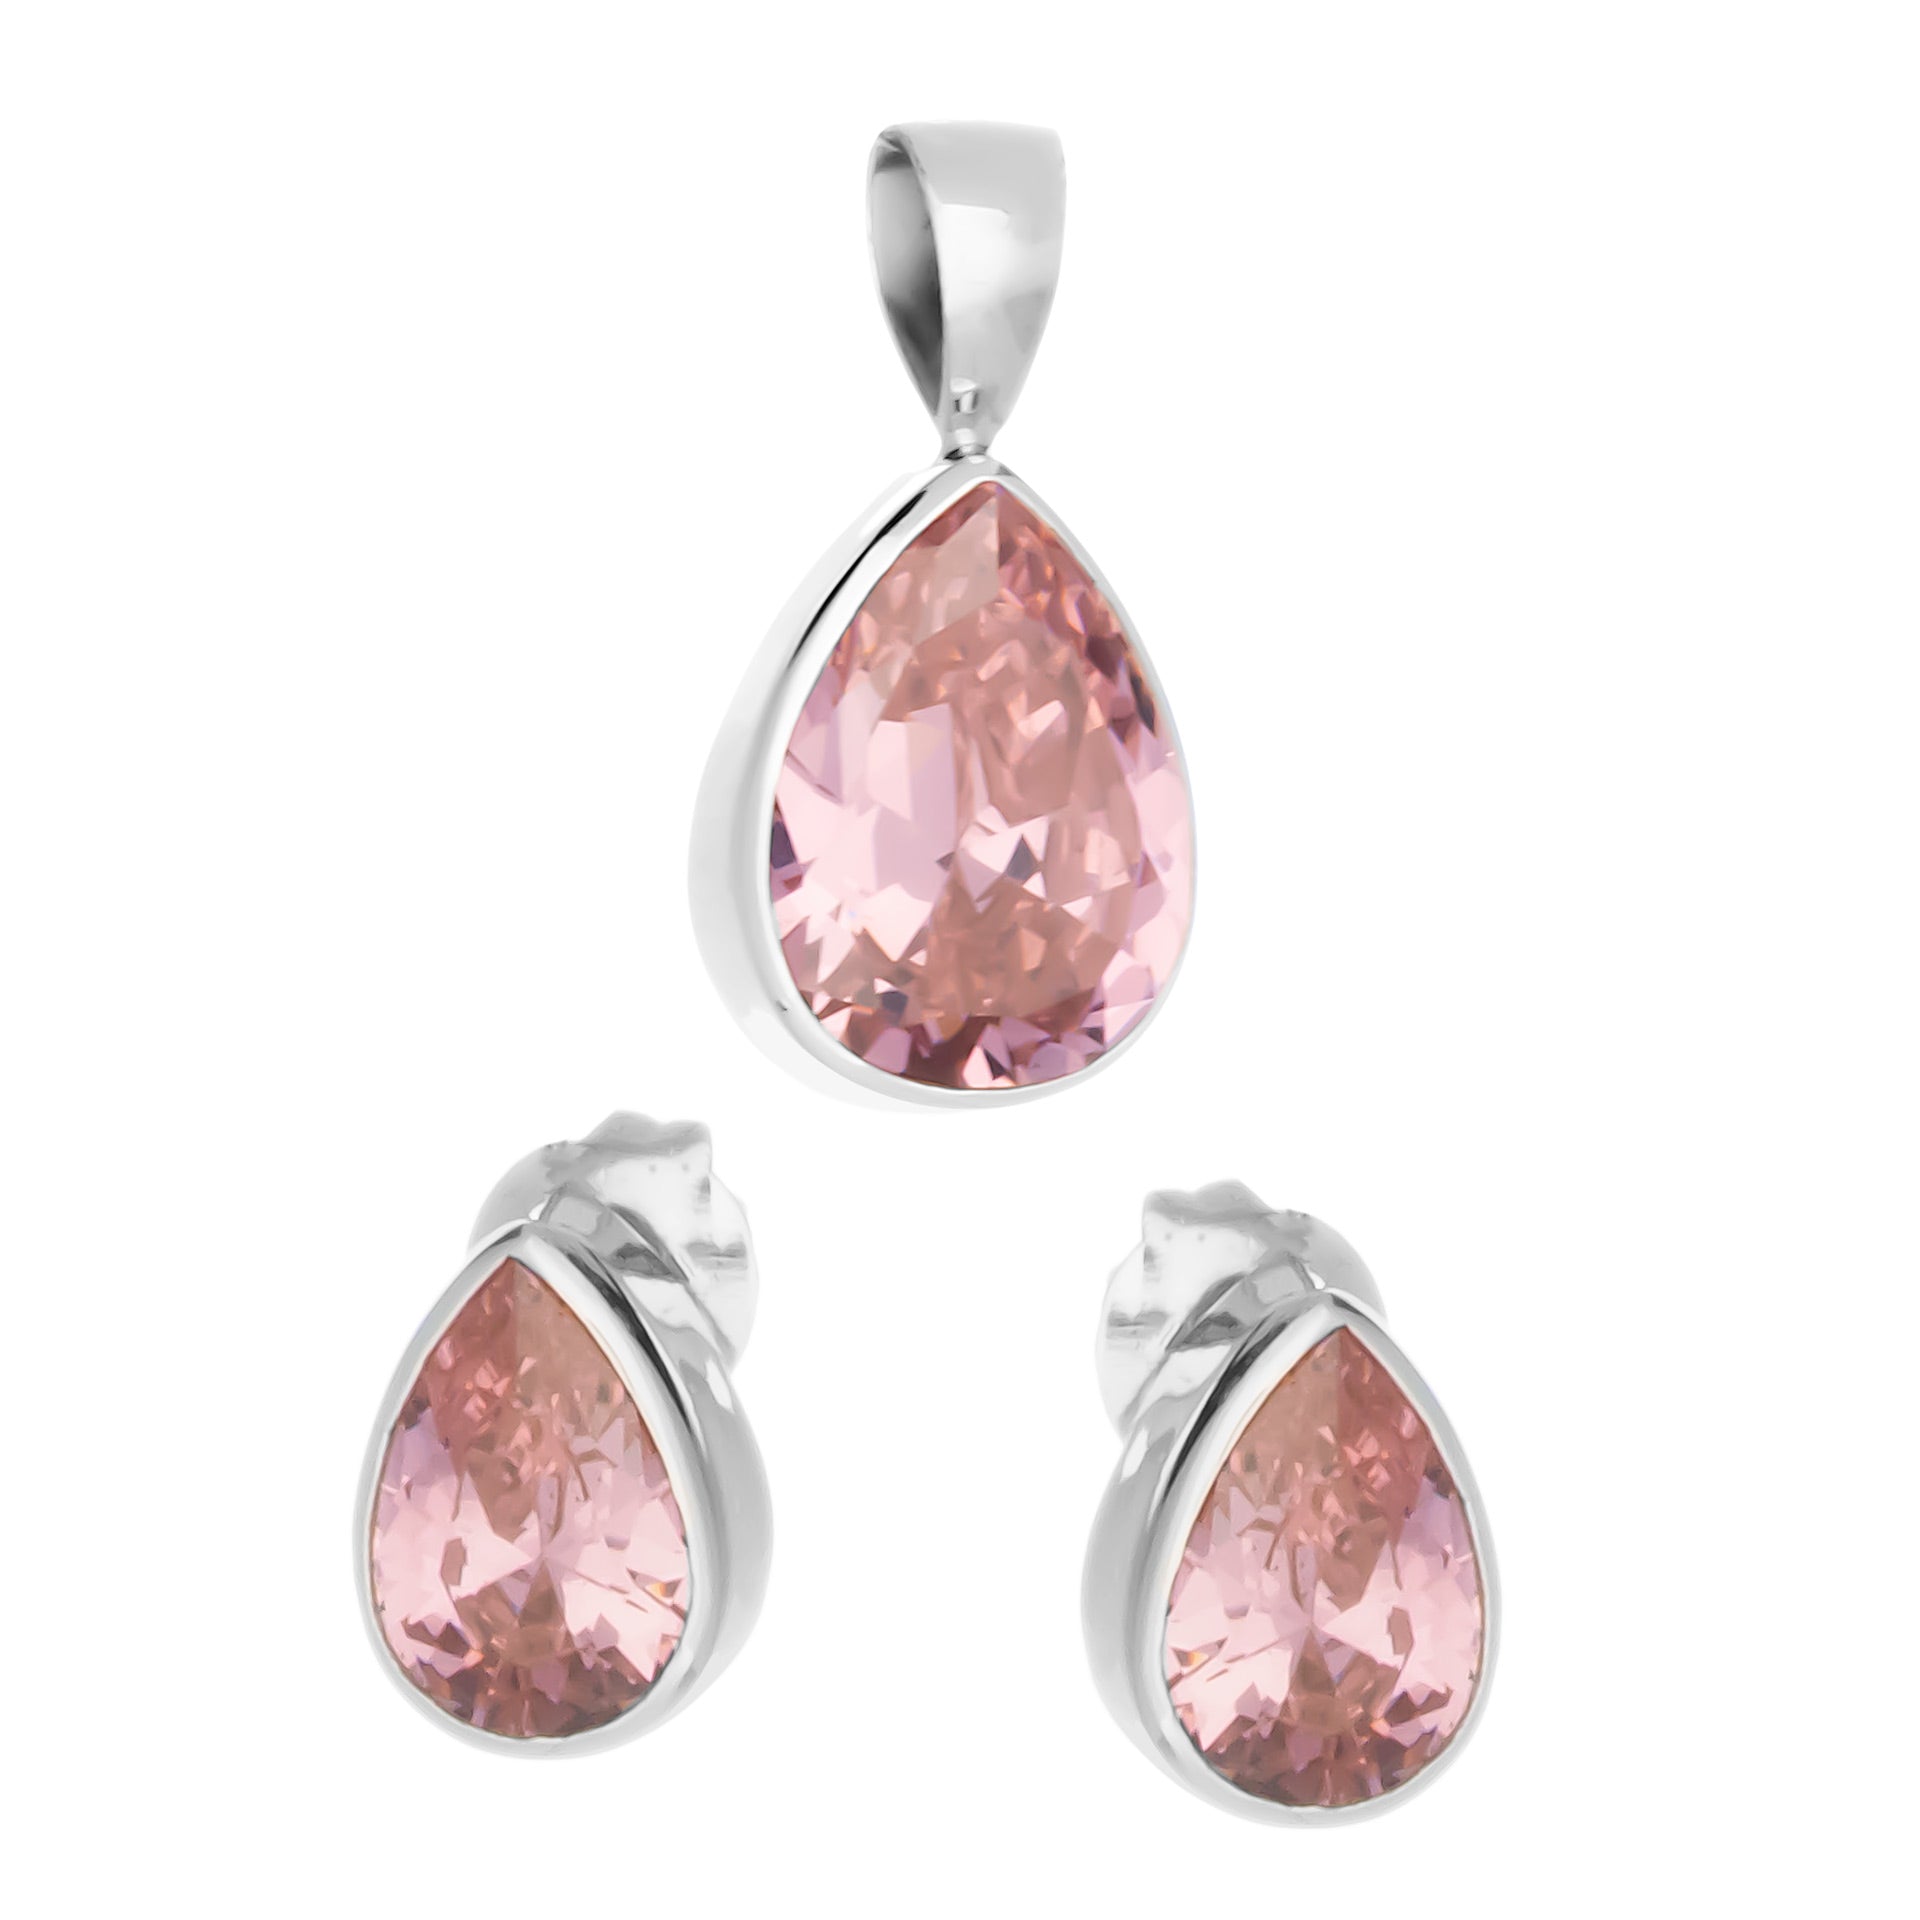 The Pink Snow Earrings and Pendant Set